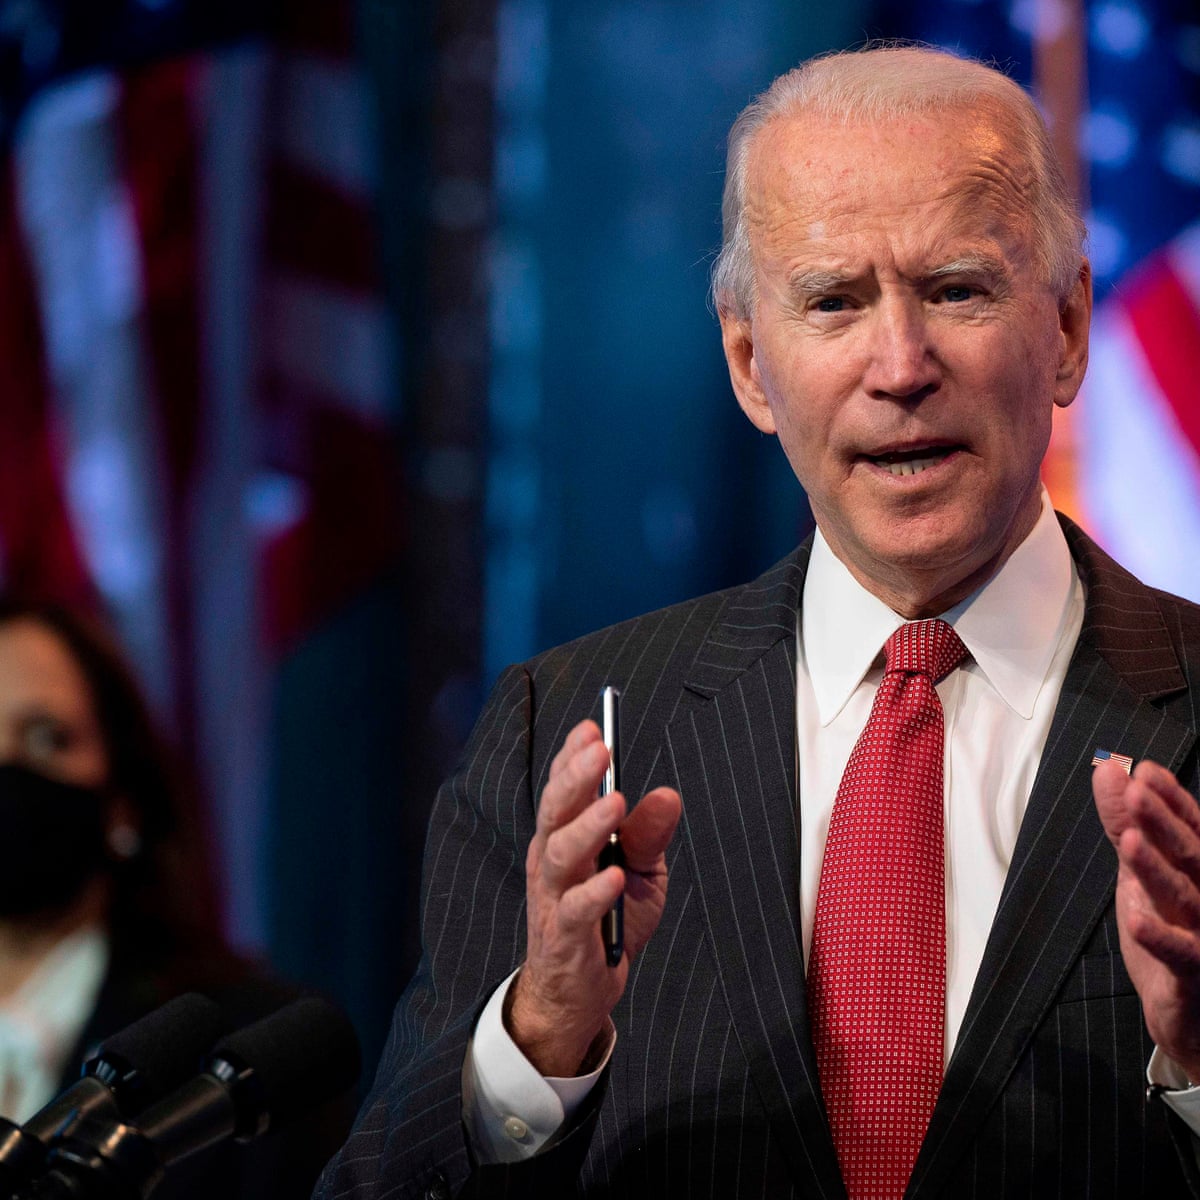 what things is joe biden known for - Biden|President|Joe|Years|Trump|Delaware|Vice|Time|Obama|Senate|States|Law|Age|Campaign|Election|Administration|Family|House|Senator|Office|School|Wife|People|Hunter|University|Act|State|Year|Life|Party|Committee|Children|Beau|Daughter|War|Jill|Day|Facts|Americans|Presidency|Joe Biden|United States|Vice President|White House|Law School|President Trump|Foreign Relations Committee|Donald Trump|President Biden|Presidential Campaign|Presidential Election|Democratic Party|Syracuse University|United Nations|Net Worth|Barack Obama|Judiciary Committee|Neilia Hunter|U.S. Senate|Hillary Clinton|New York Times|Obama Administration|Empty Store Shelves|Systemic Racism|Castle County Council|Archmere Academy|U.S. Senator|Vice Presidency|Second Term|Biden Administration